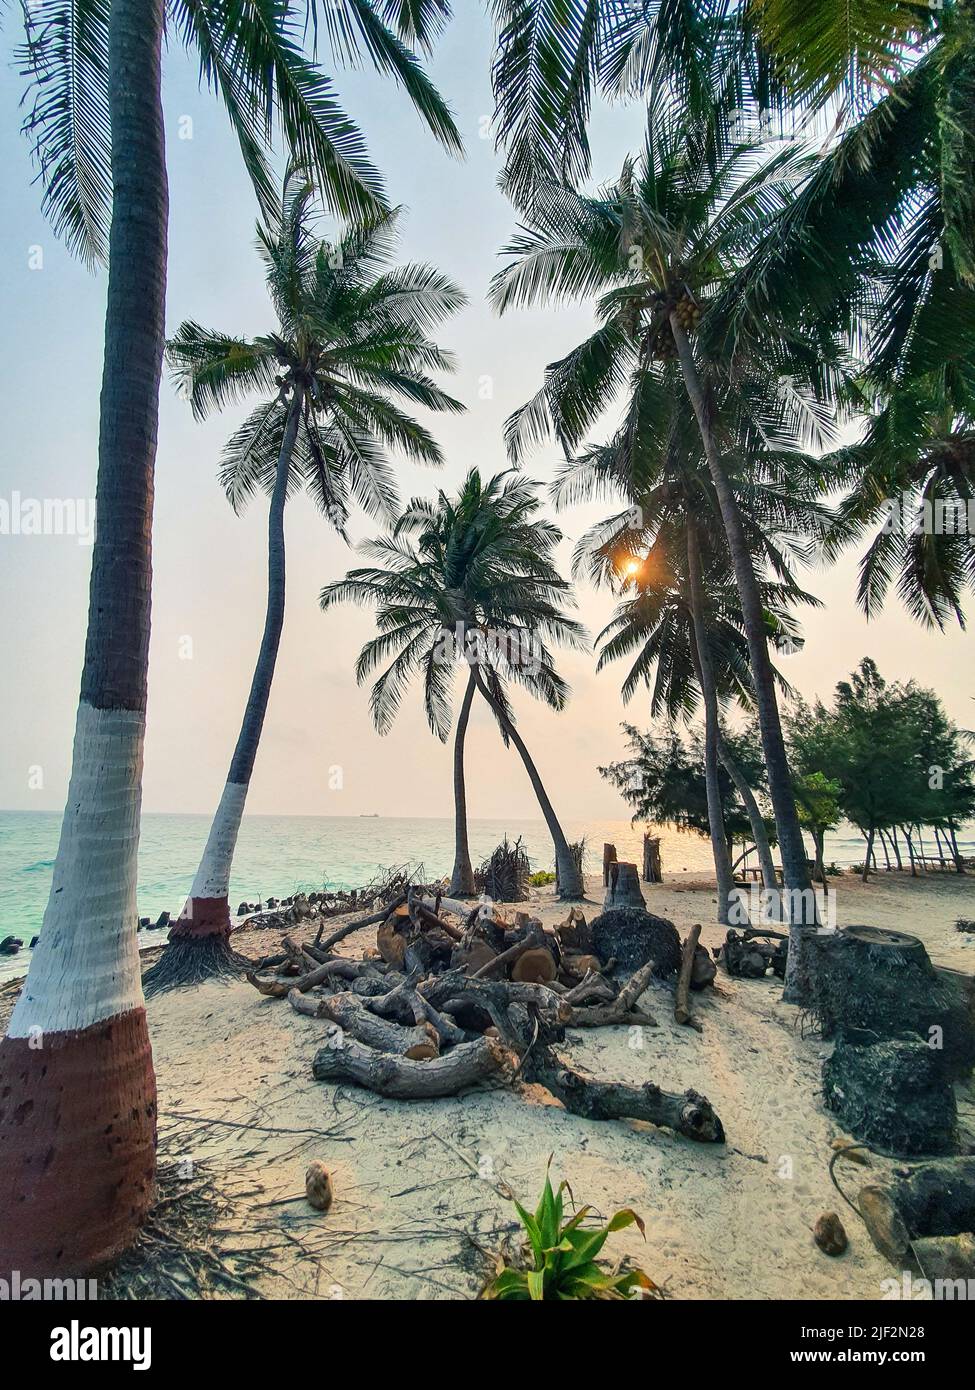 Lakshadweep, India - March 15, 2022: Coconut trees silhouette on beach in Lakshadweep Stock Photo